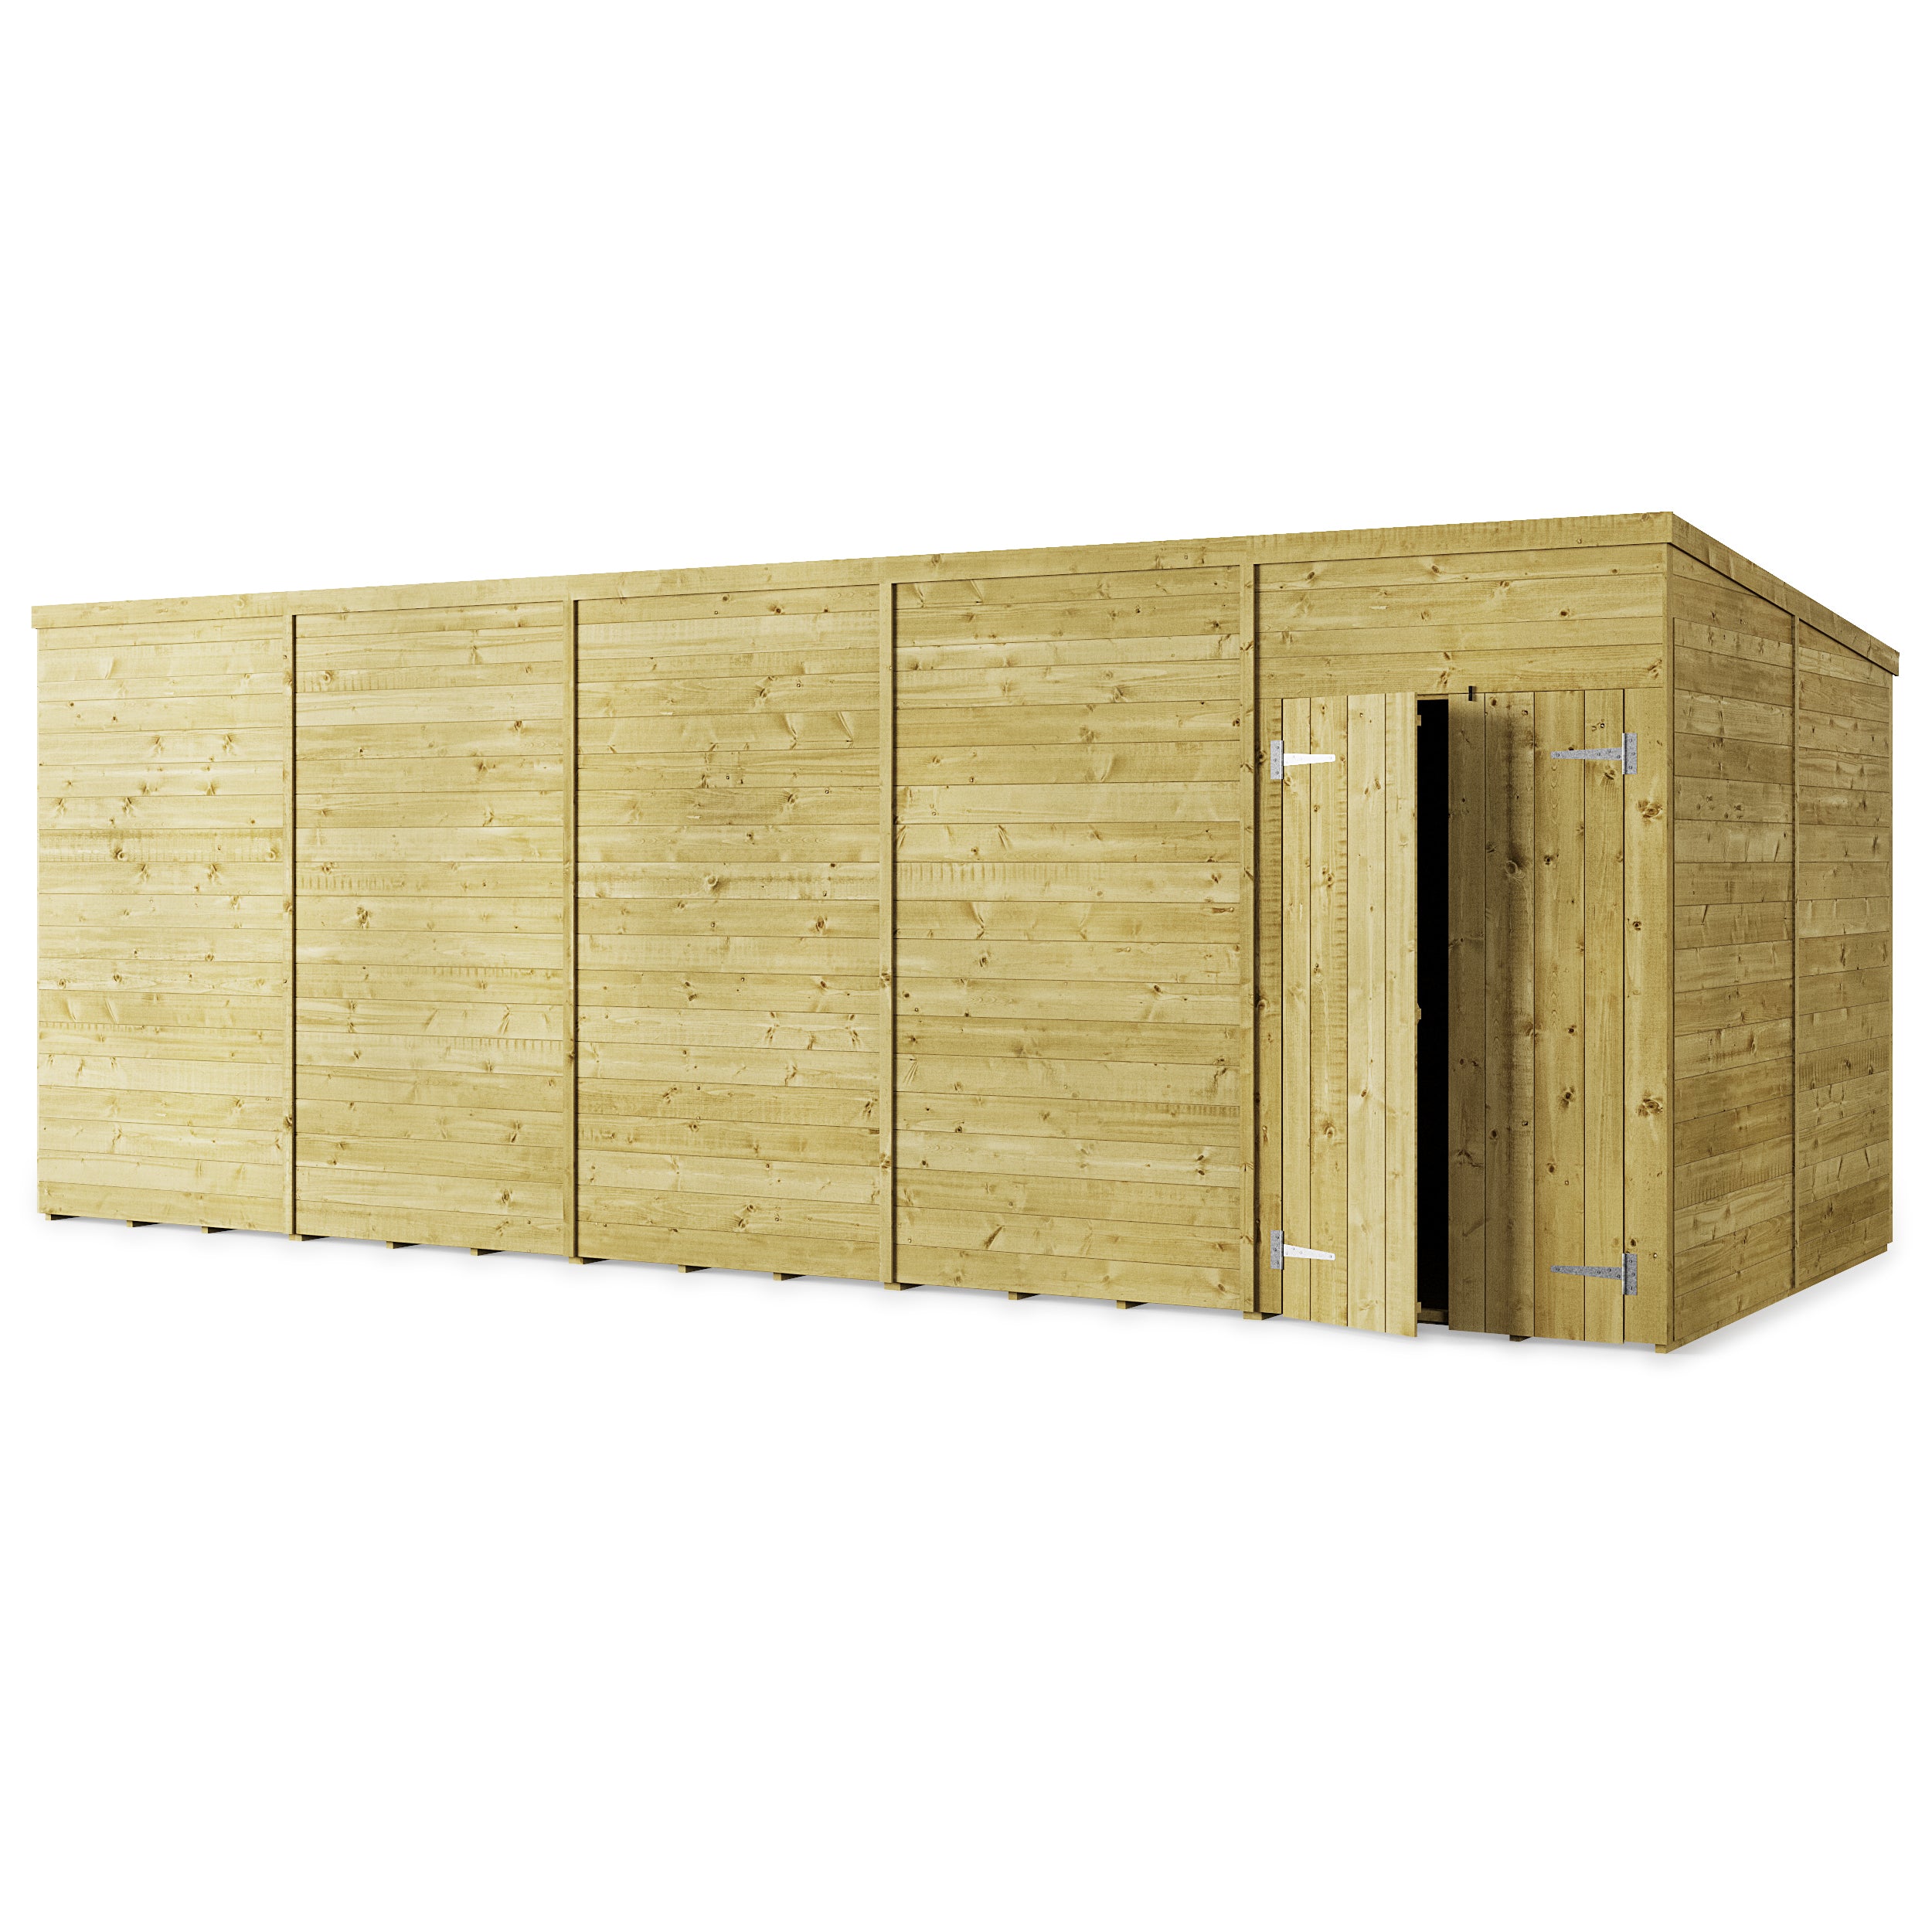 Store More Tongue and Groove Pent Shed - 20x8 Windowless